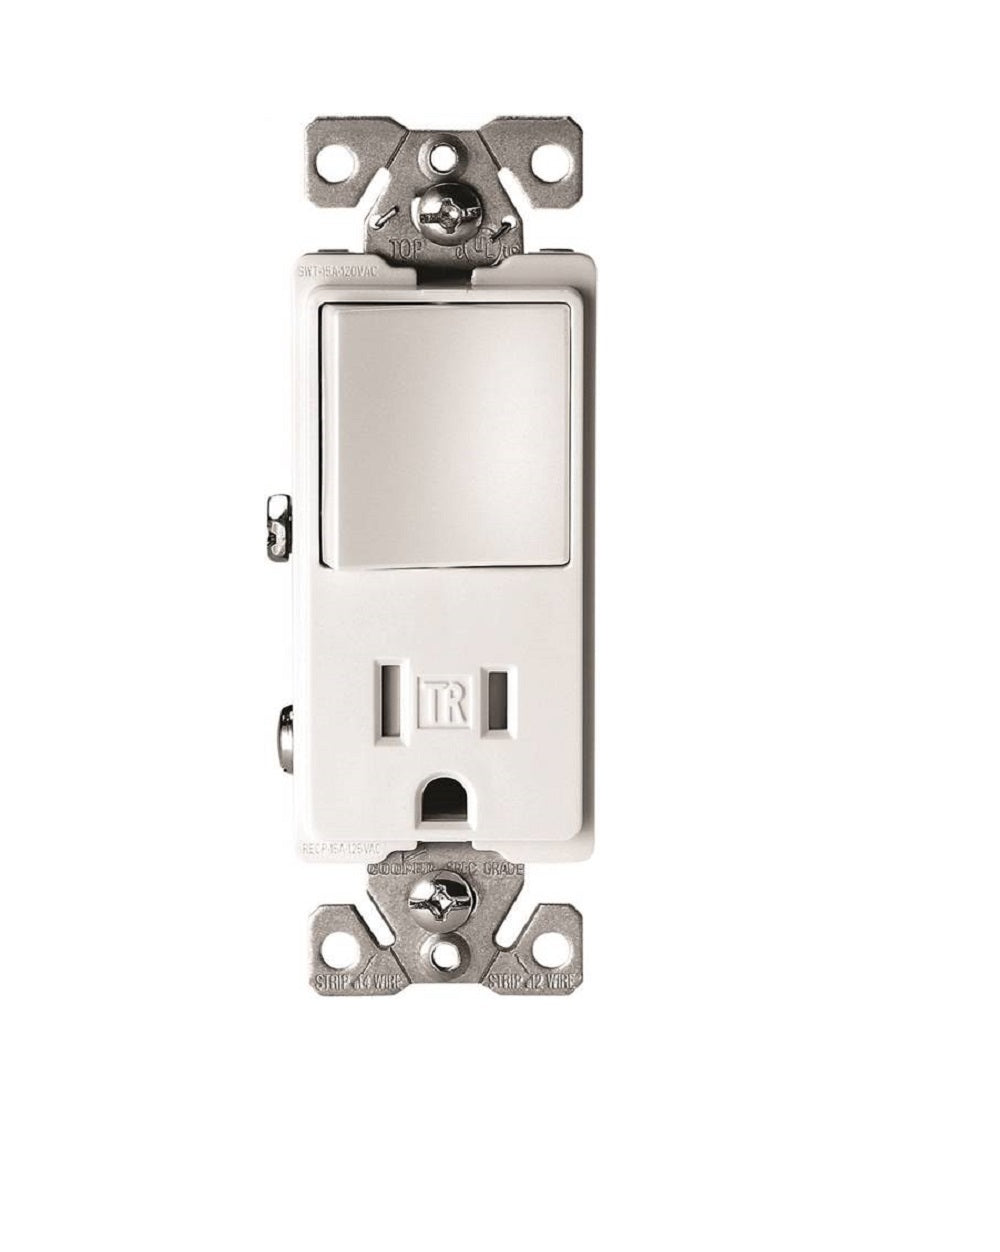 Cooper Wiring TR7730W Tamper Resistant Decorator Combination Switch/Receptacle, 15 Amp, White